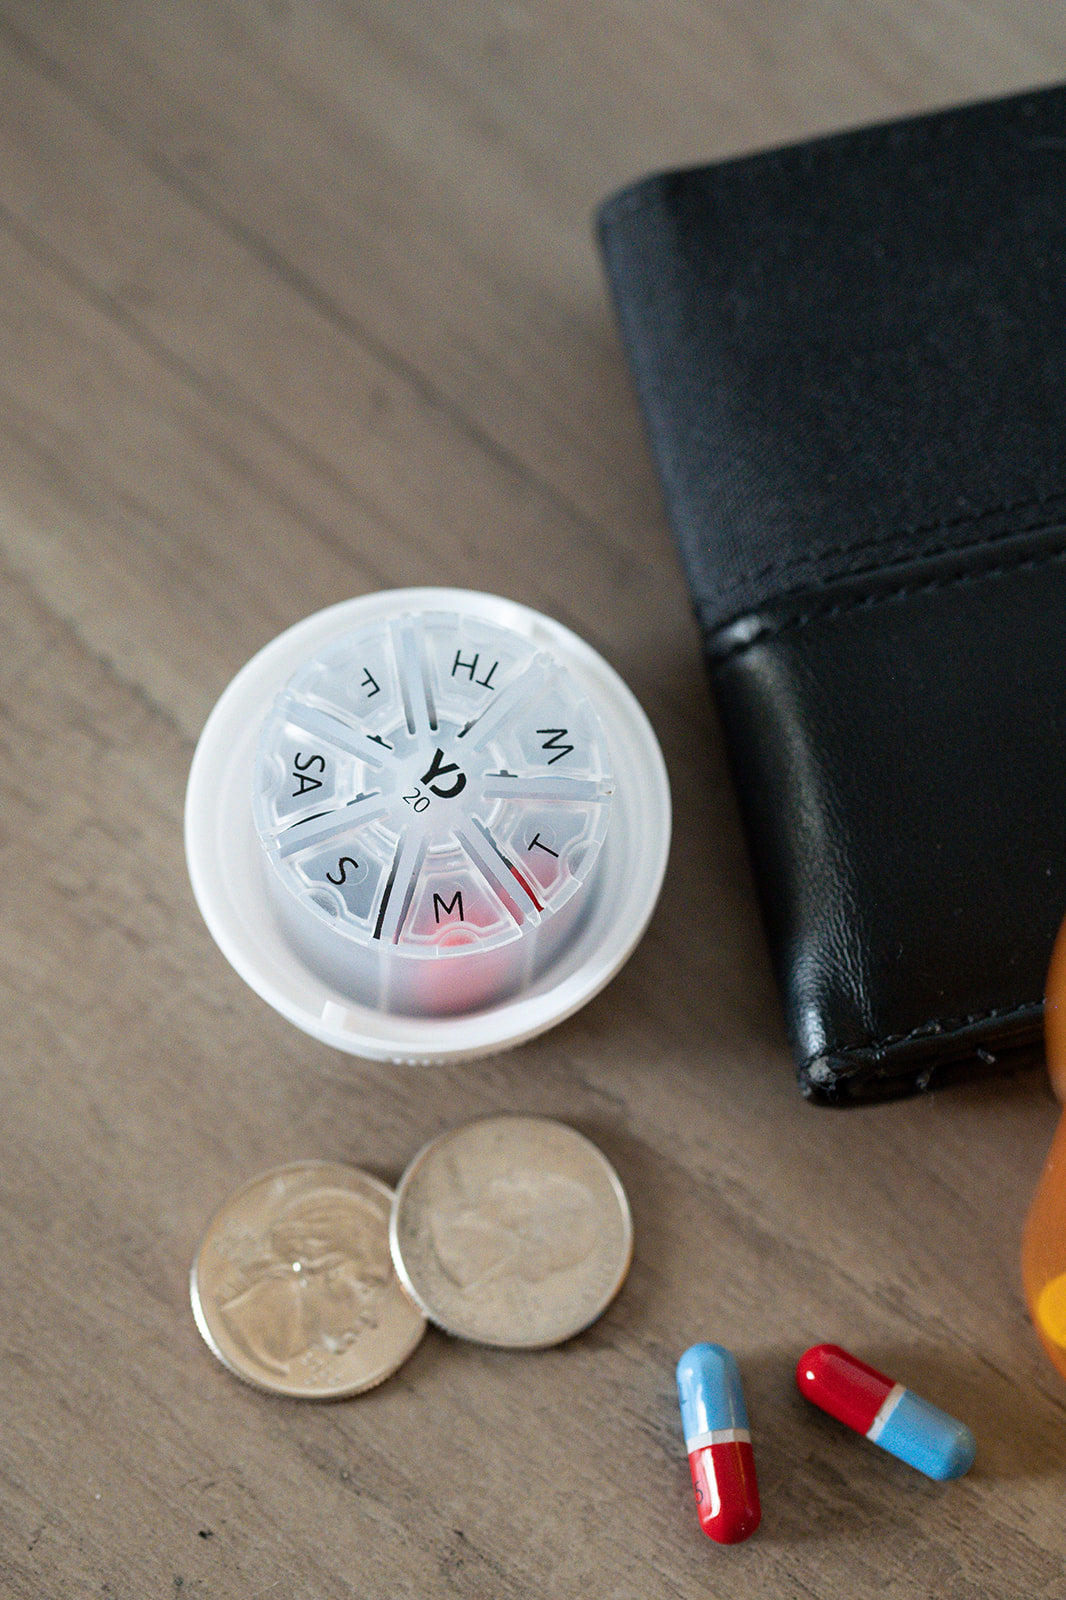 Check out our guide on these cute pill organizers. – Dosey Inc